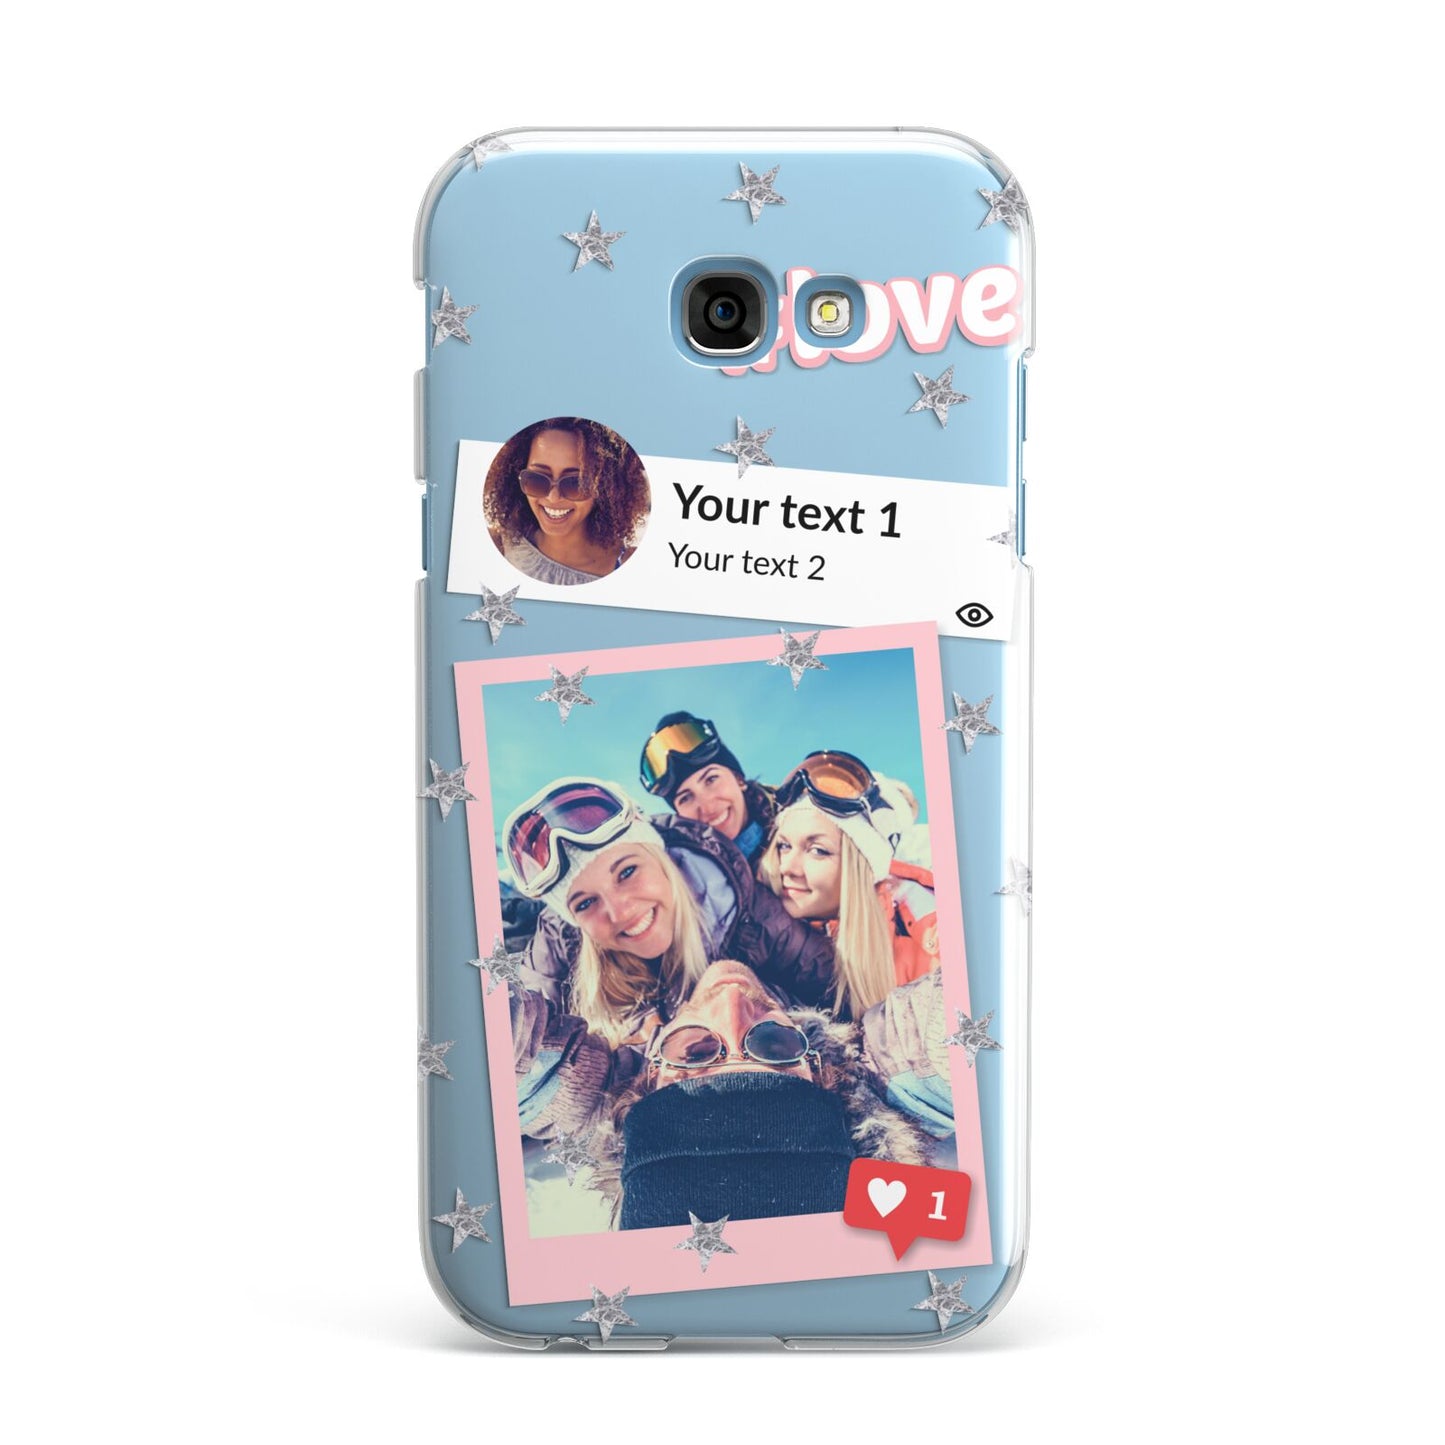 Starry Social Media Photo Montage Upload with Text Samsung Galaxy A7 2017 Case